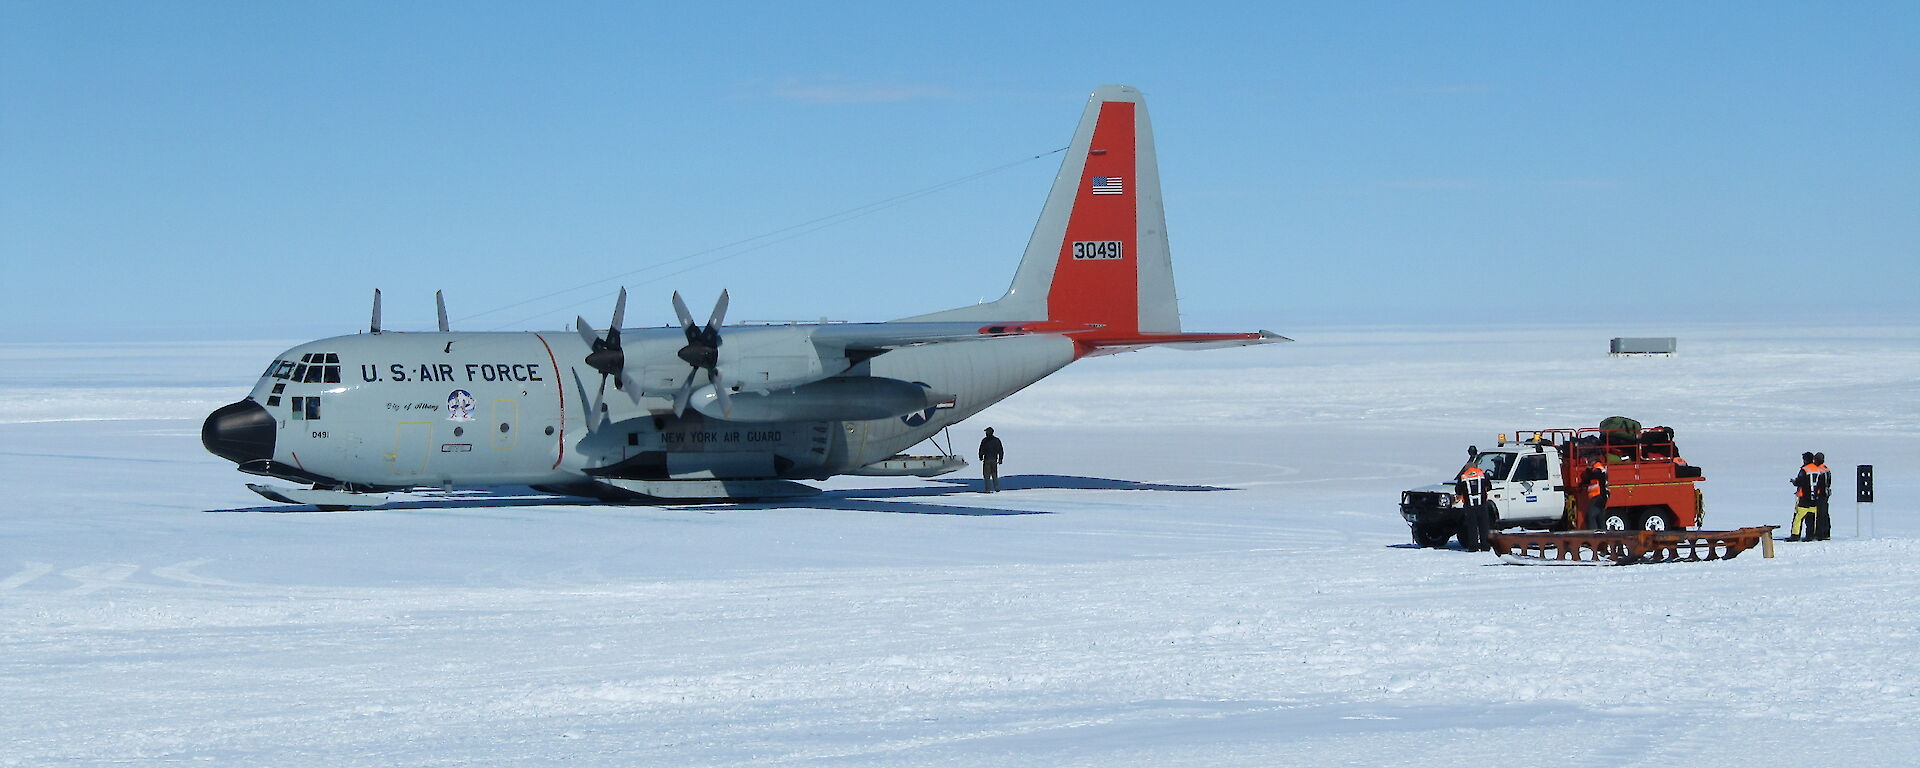 A US C-130 at Wilkins runway ready to depart for Davis Station